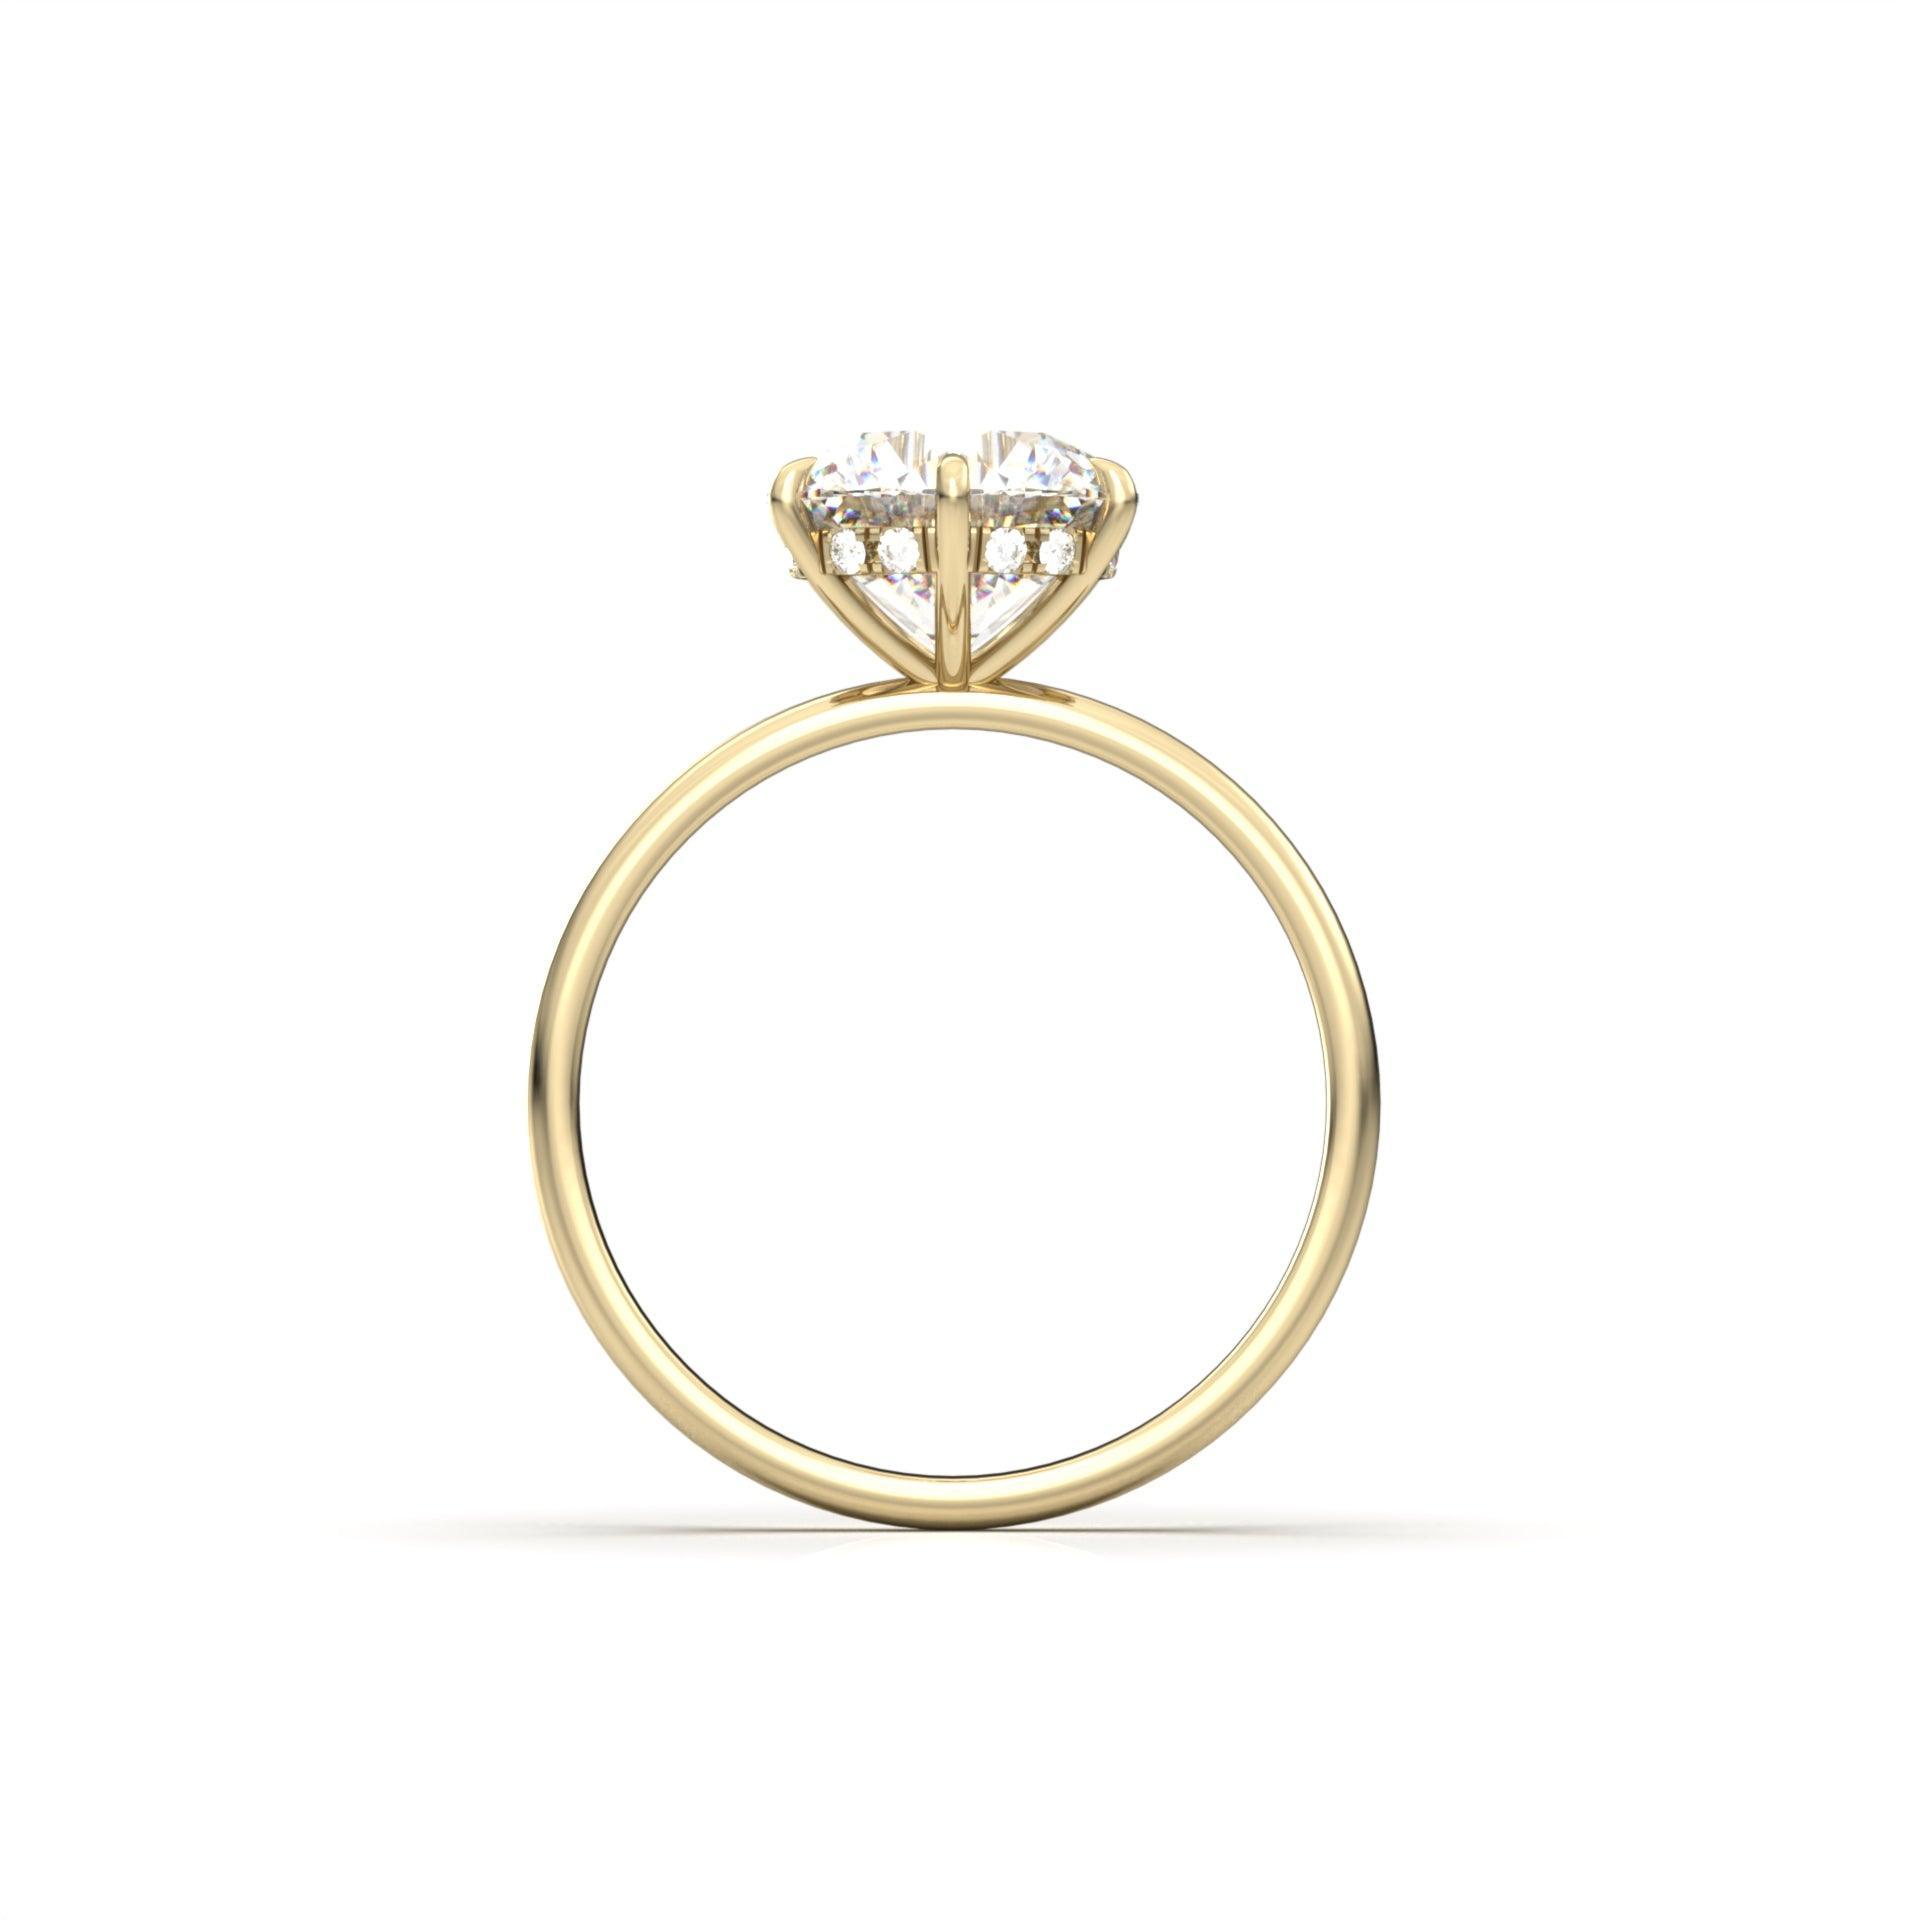 Round Cut Solitaire 6 Claw Setting With Hidden Halo - moissaniteengagementrings